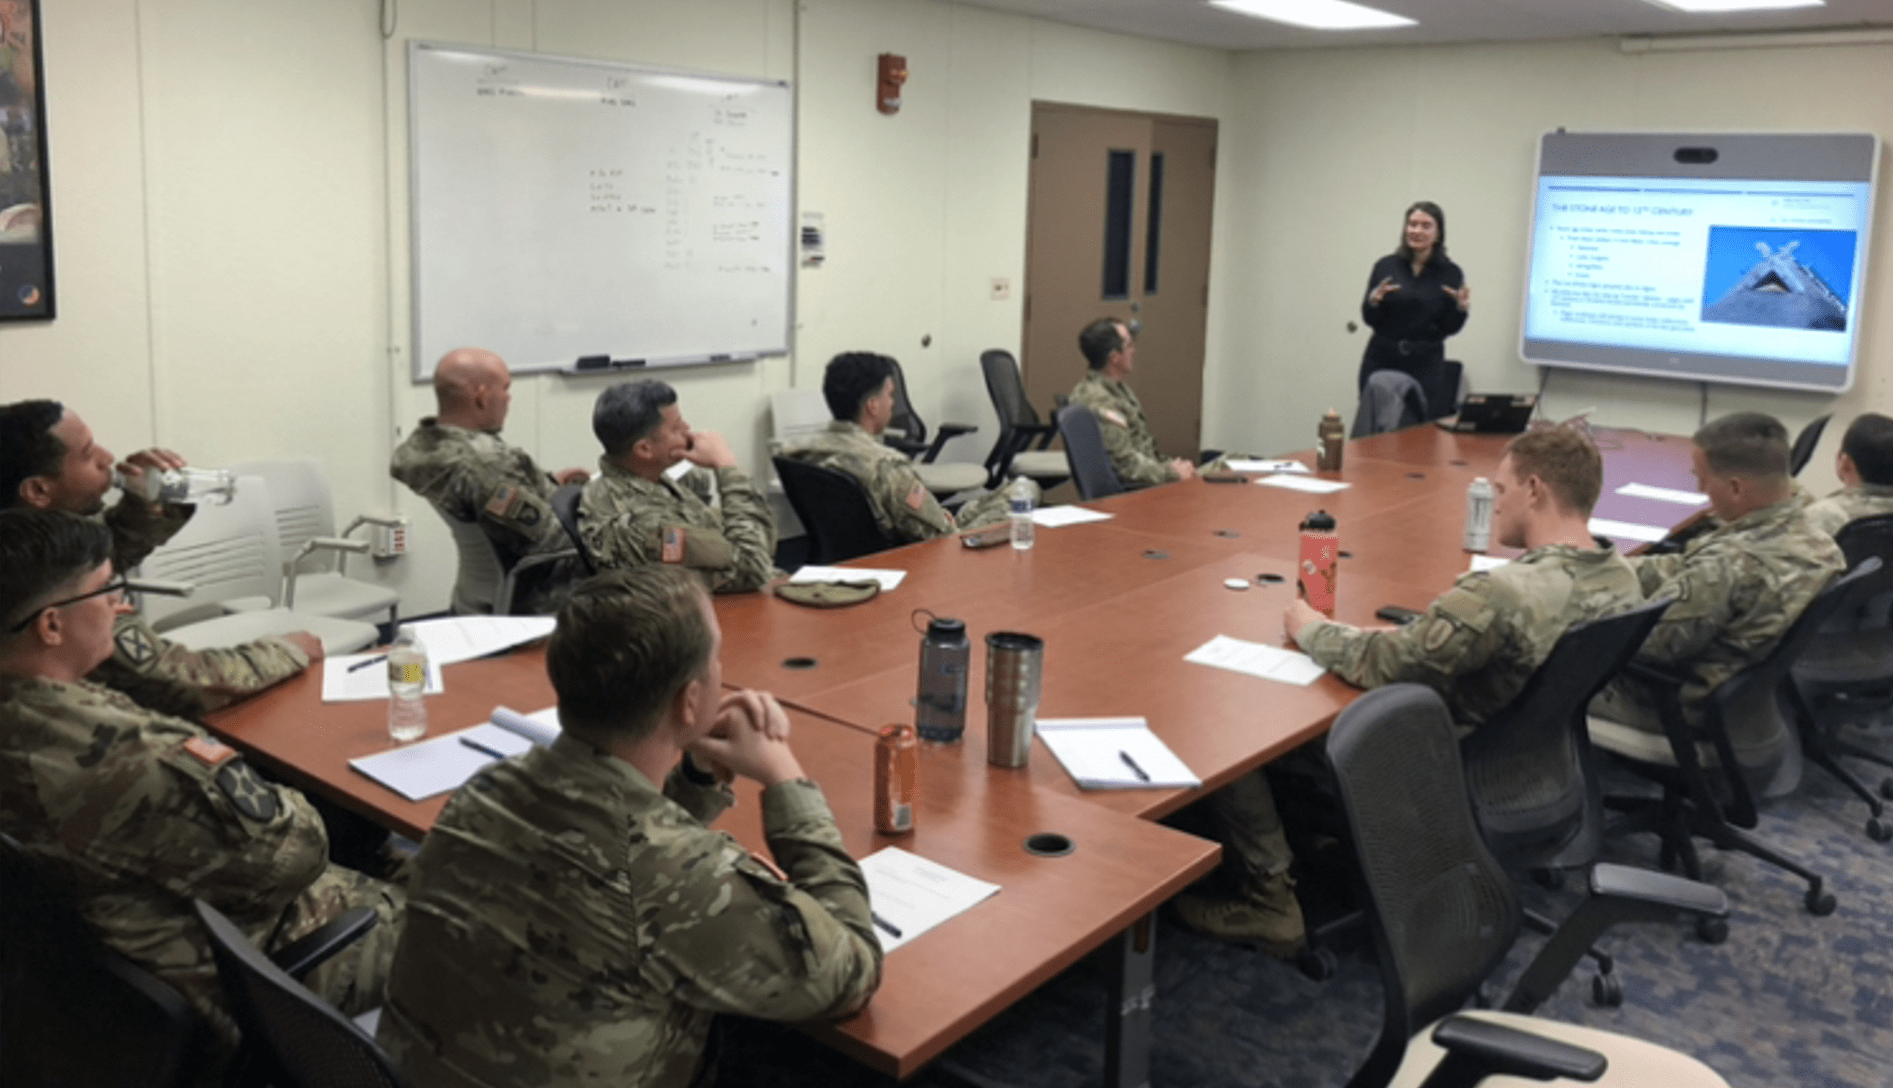 Young woman giving a presentation to a group of US troops